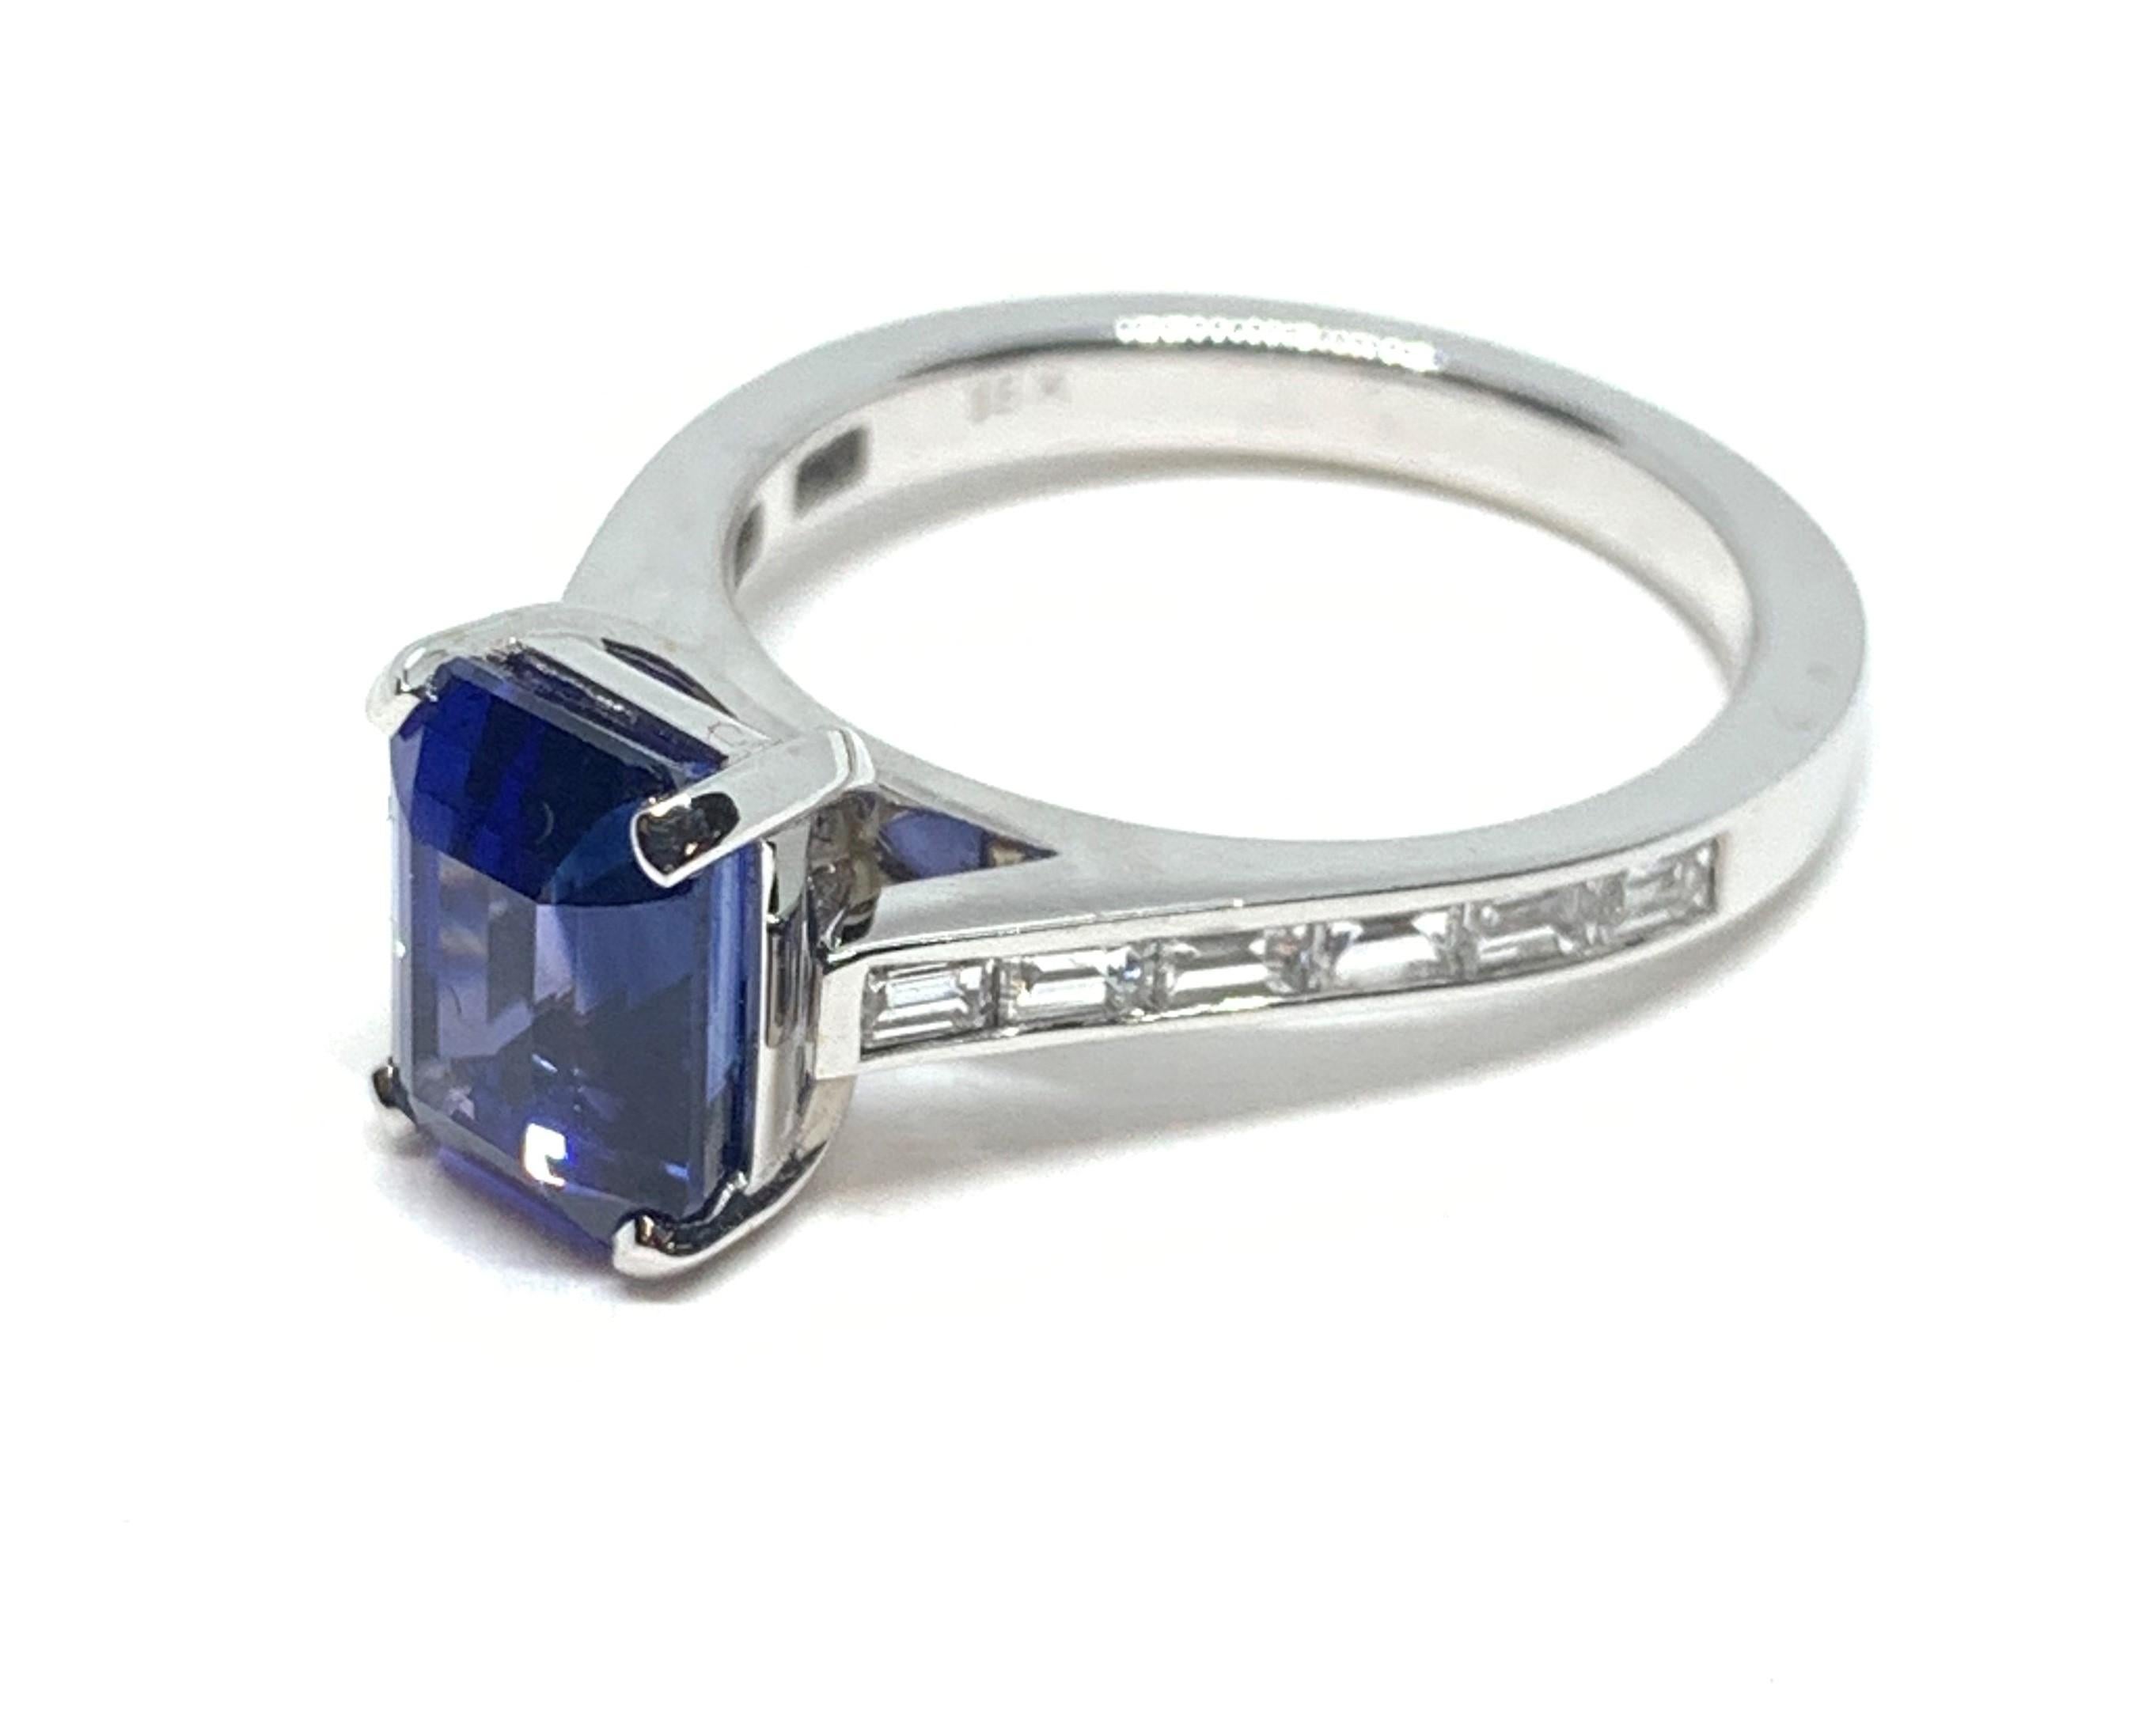 3.94 ct. Blue Sapphire & Channel Set Diamond 18k White Gold Engagement Band Ring 3